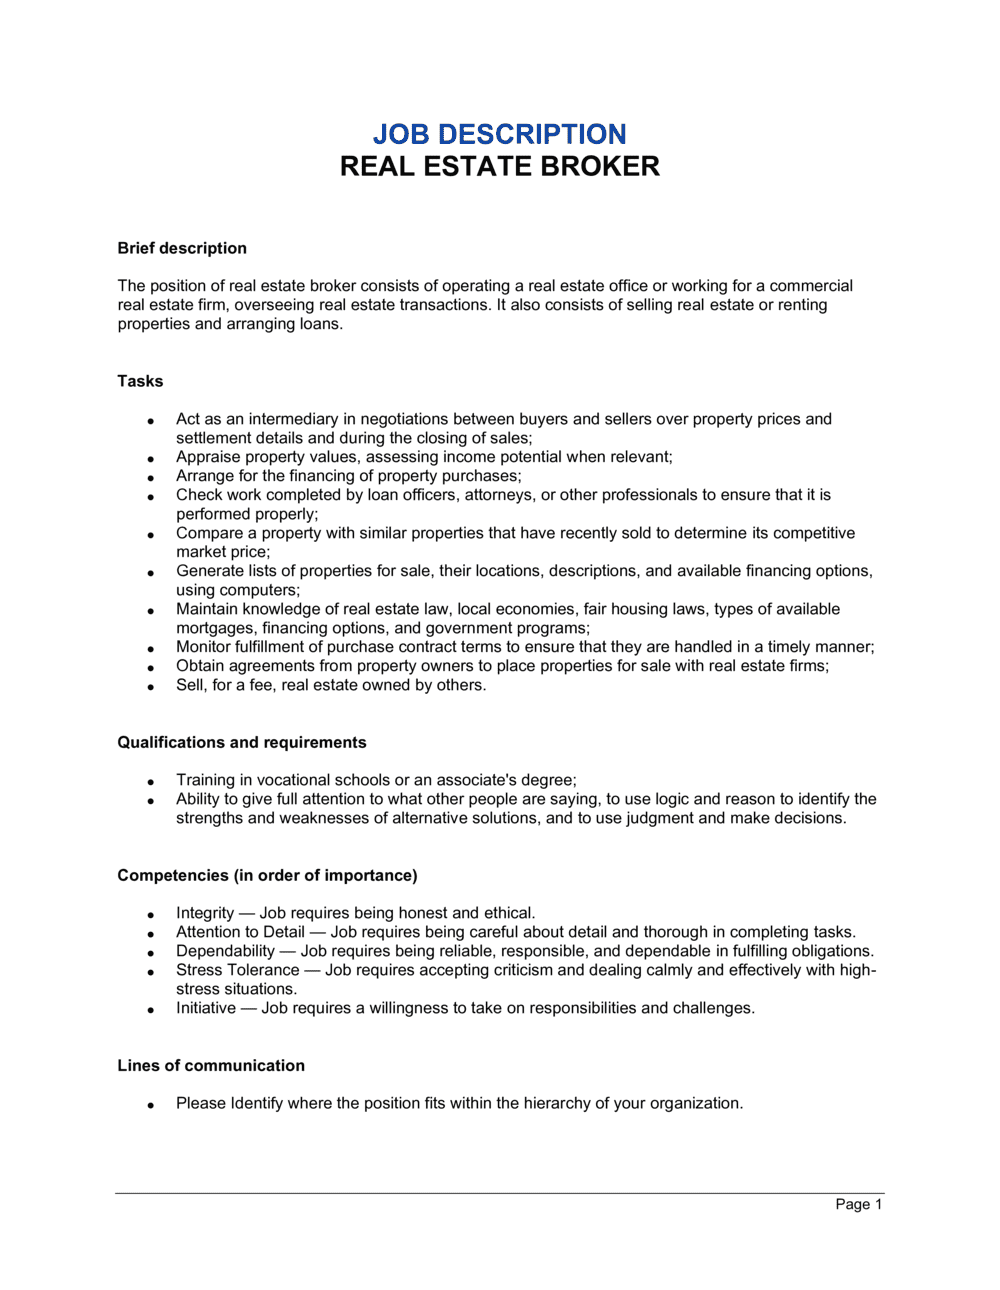 Real Estate Broker Job Description Template  by Business-in-a-Box™